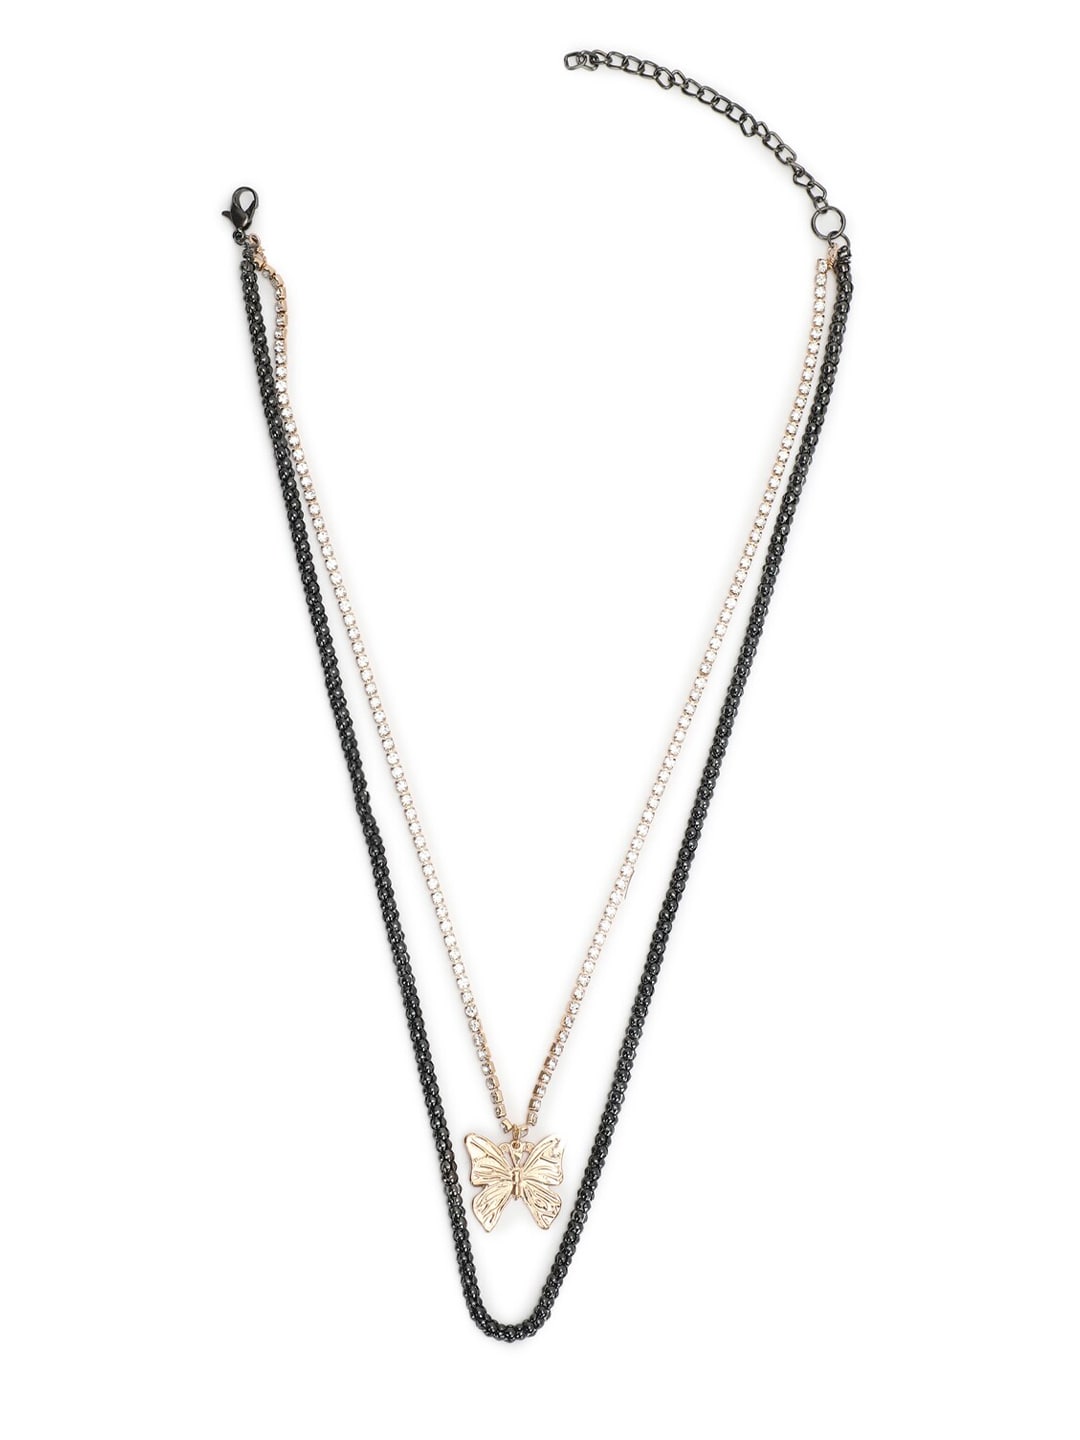 FOREVER 21 Woman Gold-Toned & Black Necklace Price in India